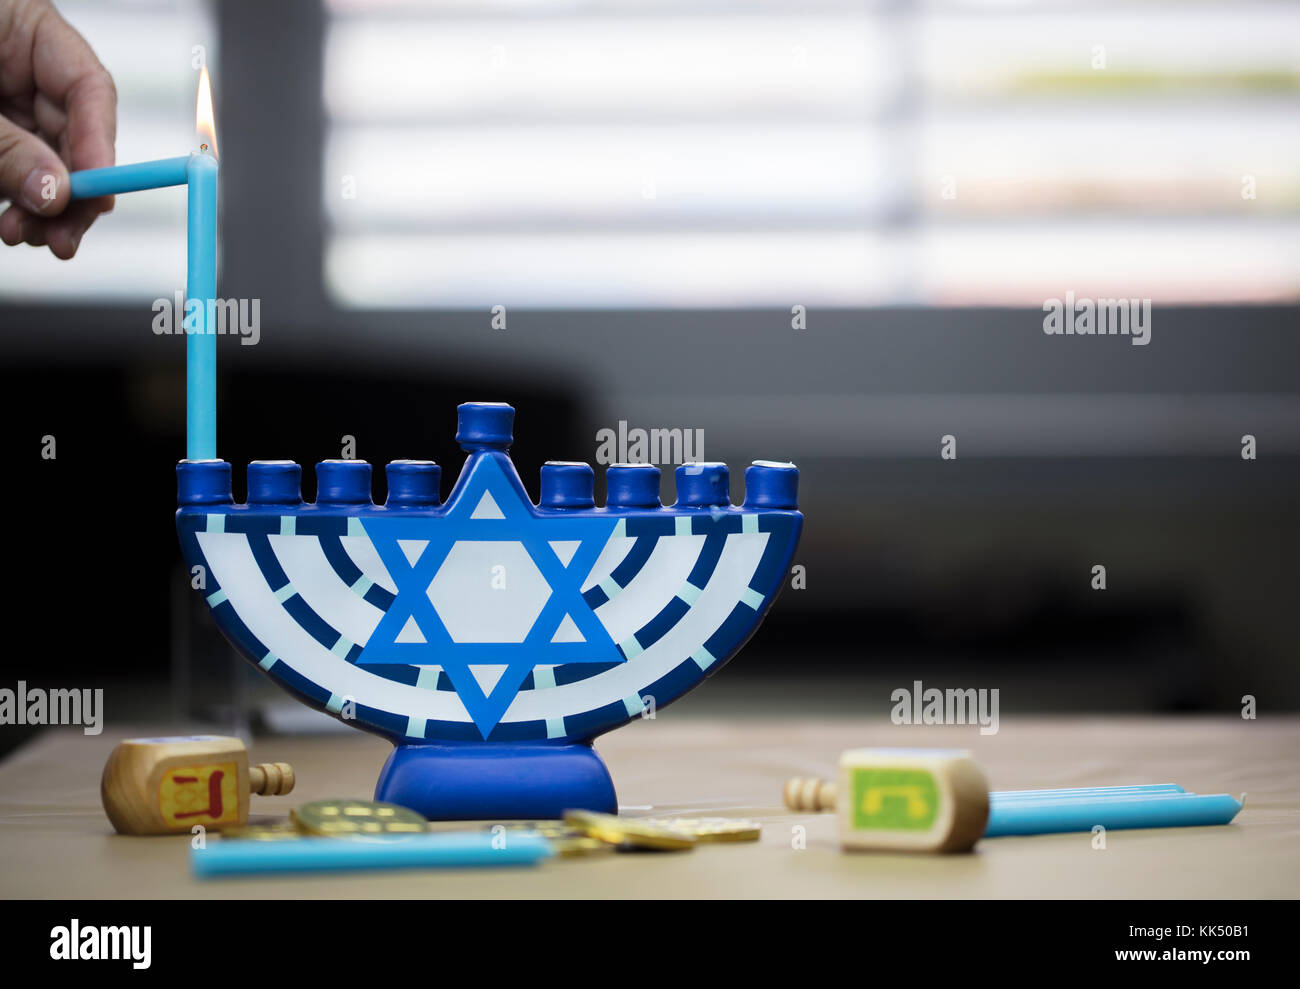 Hanukkah candles lit for the holiday celebration surrounded by dreidels and chocolate coins Stock Photo